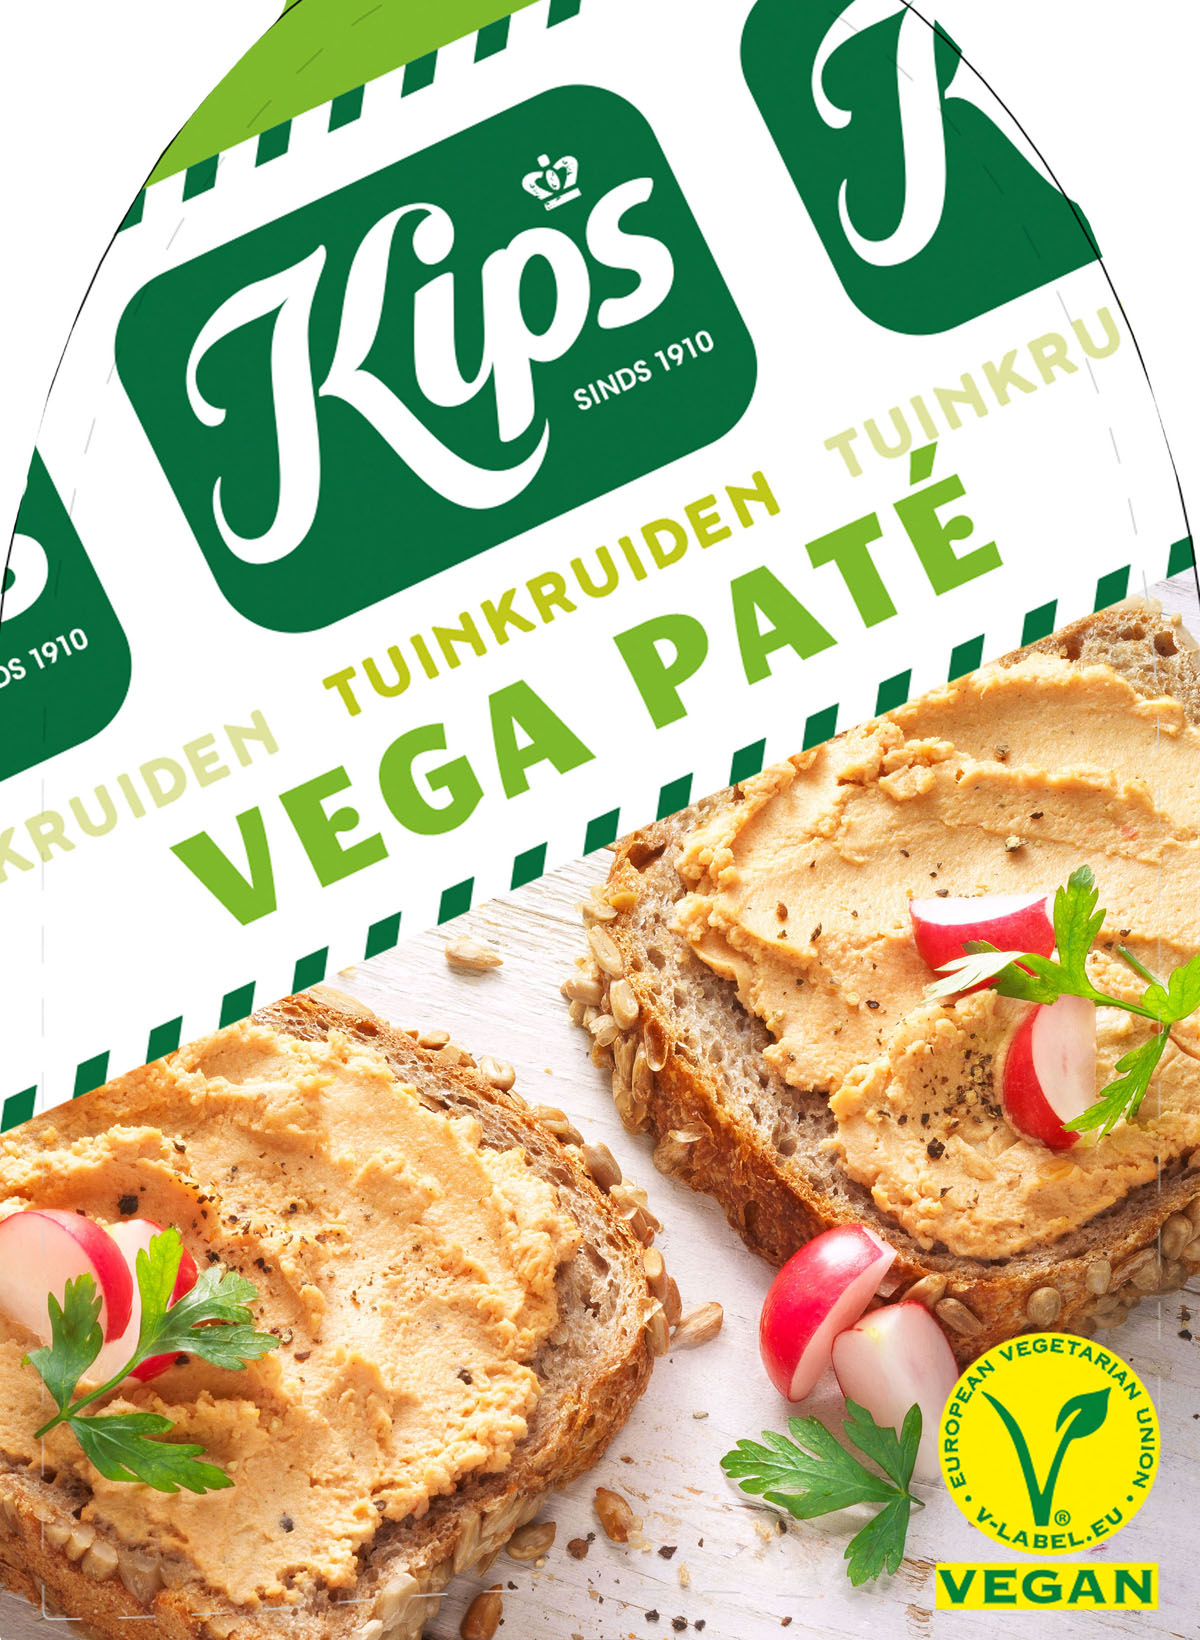 photo for packaging design of Kips Vegan pathe by STUDIO_M food photographer amsterdam